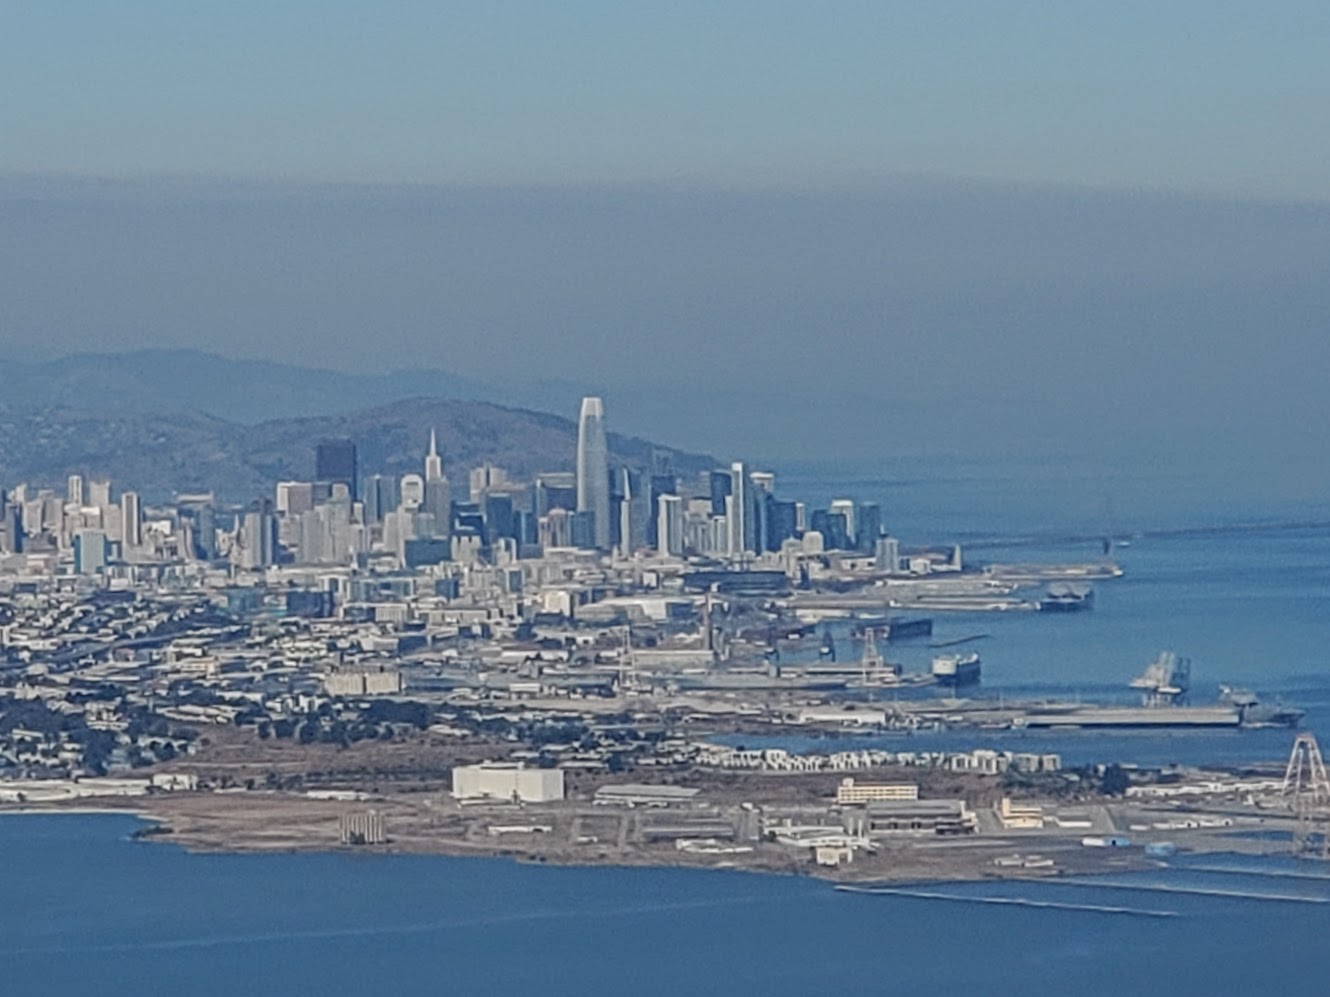 on approach to SFO